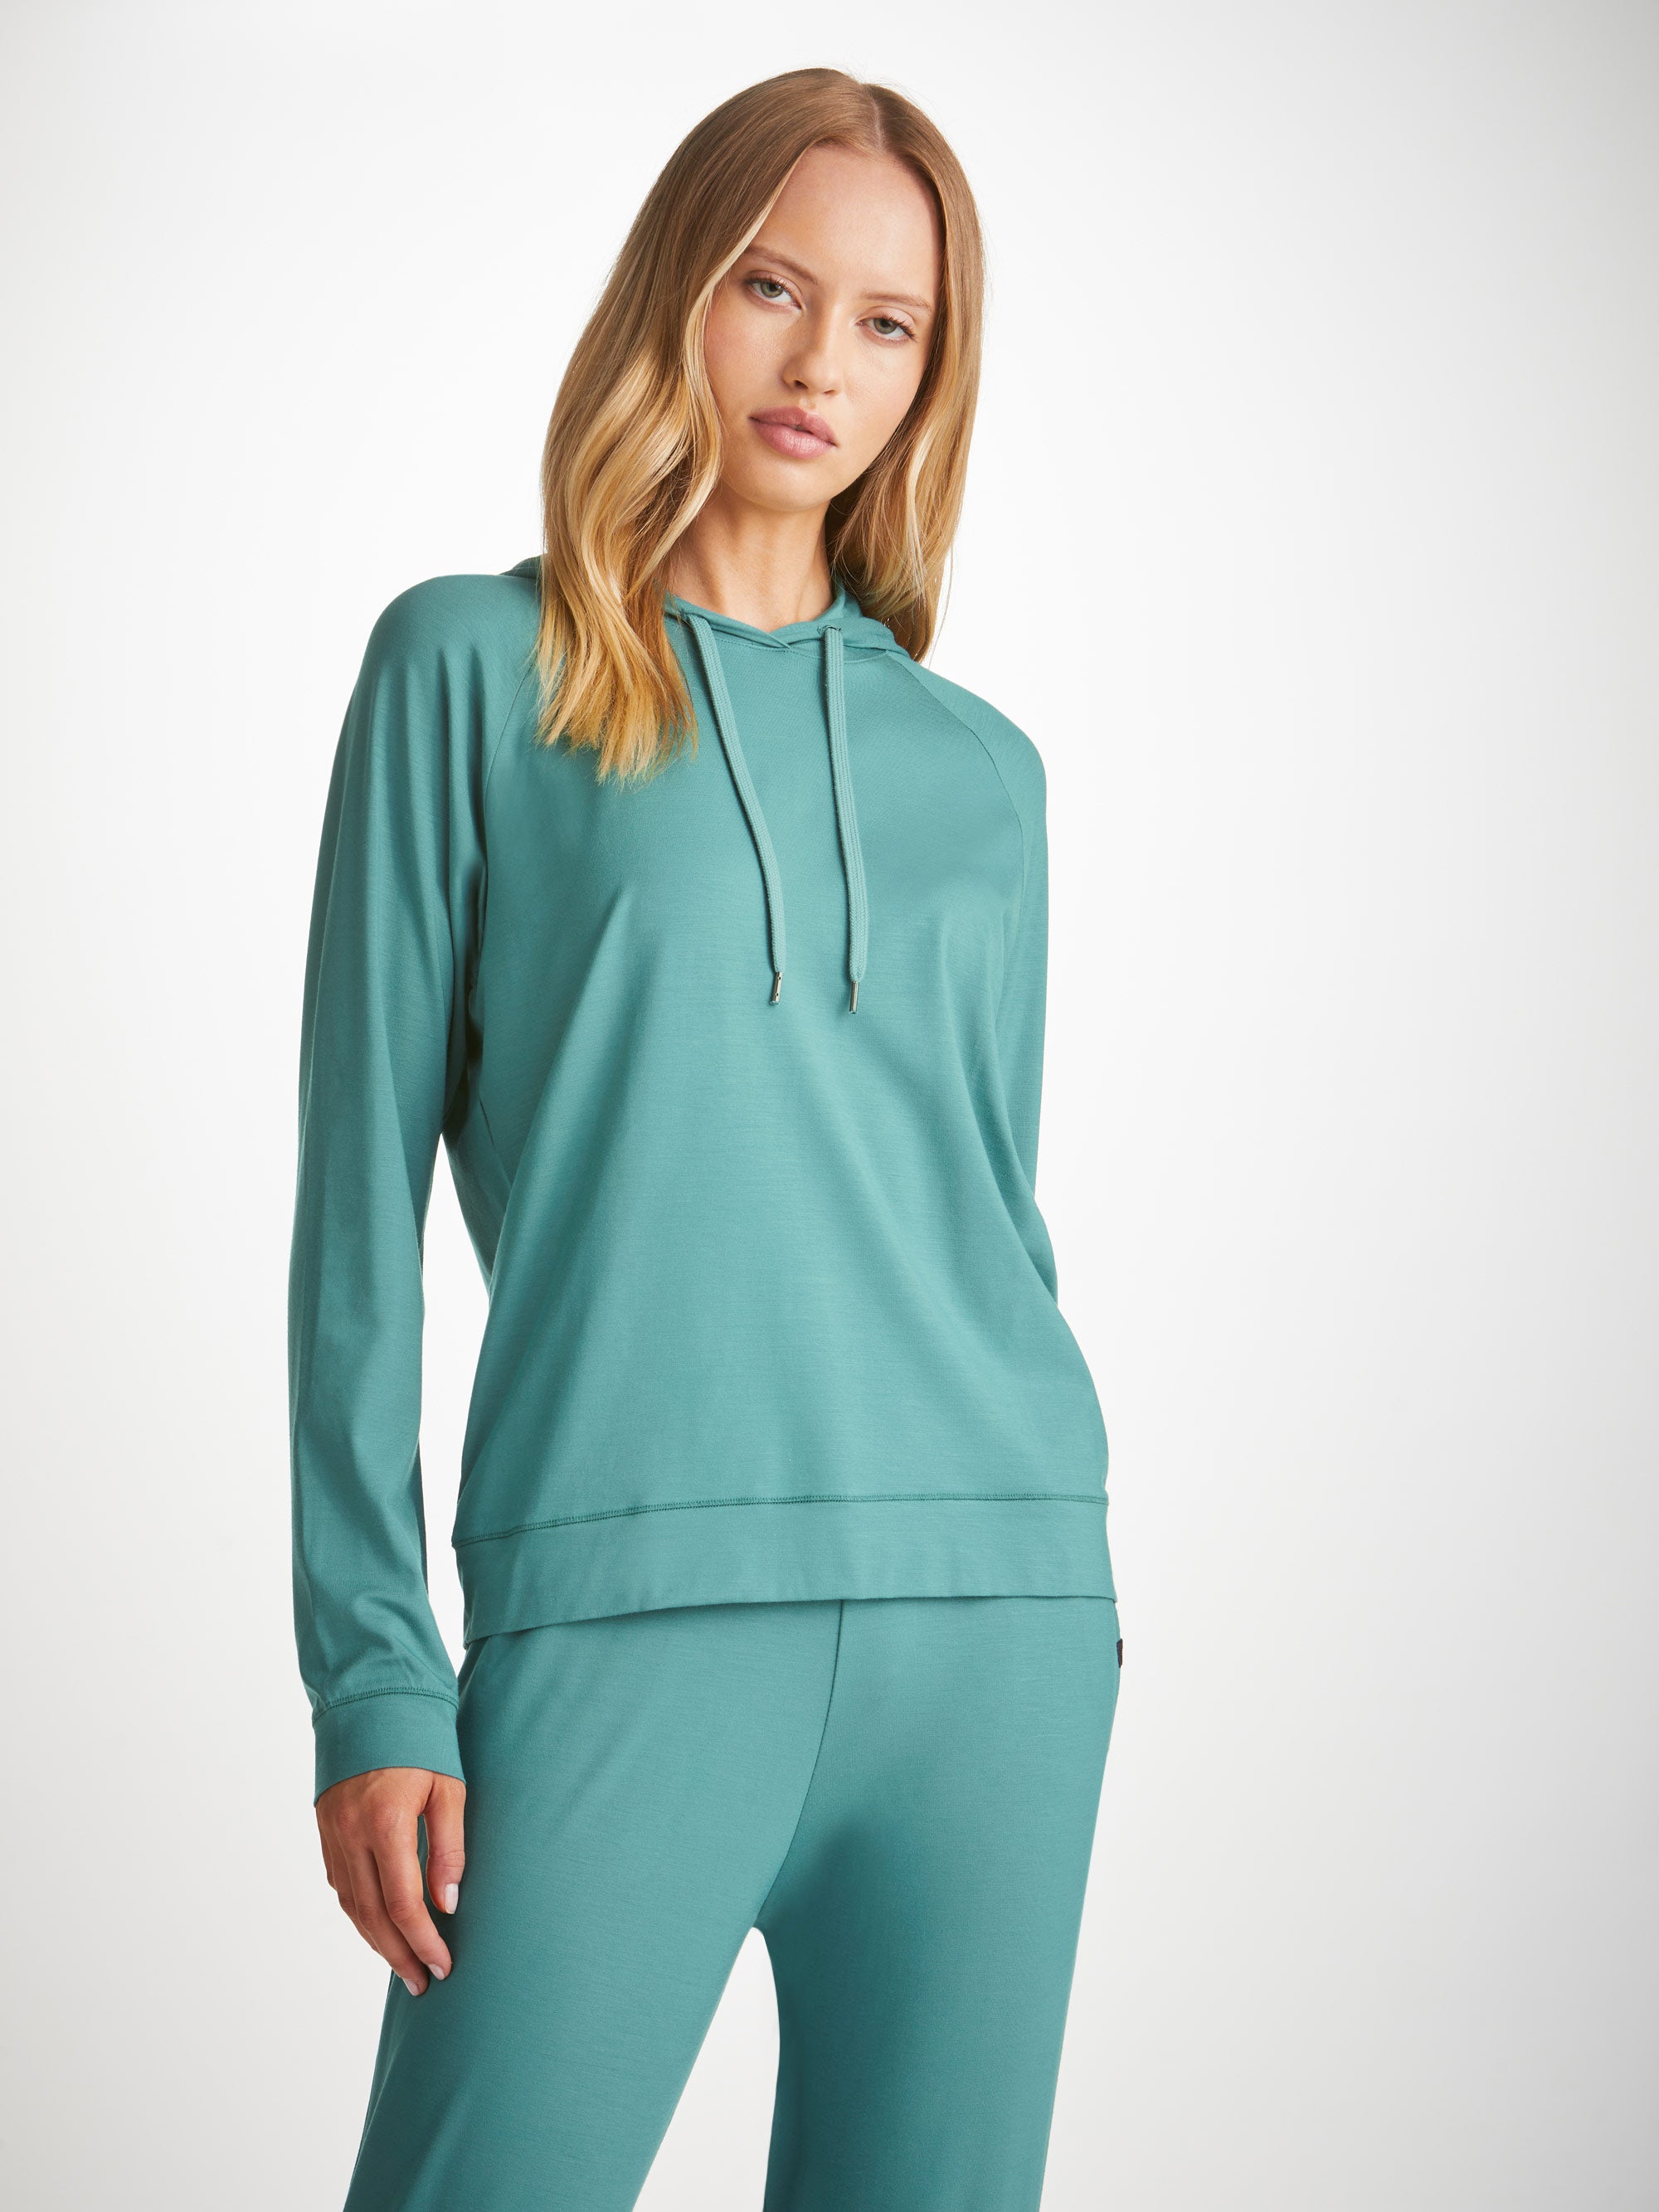 Women's Pullover Hoodie Basel Micro Modal Stretch Teal